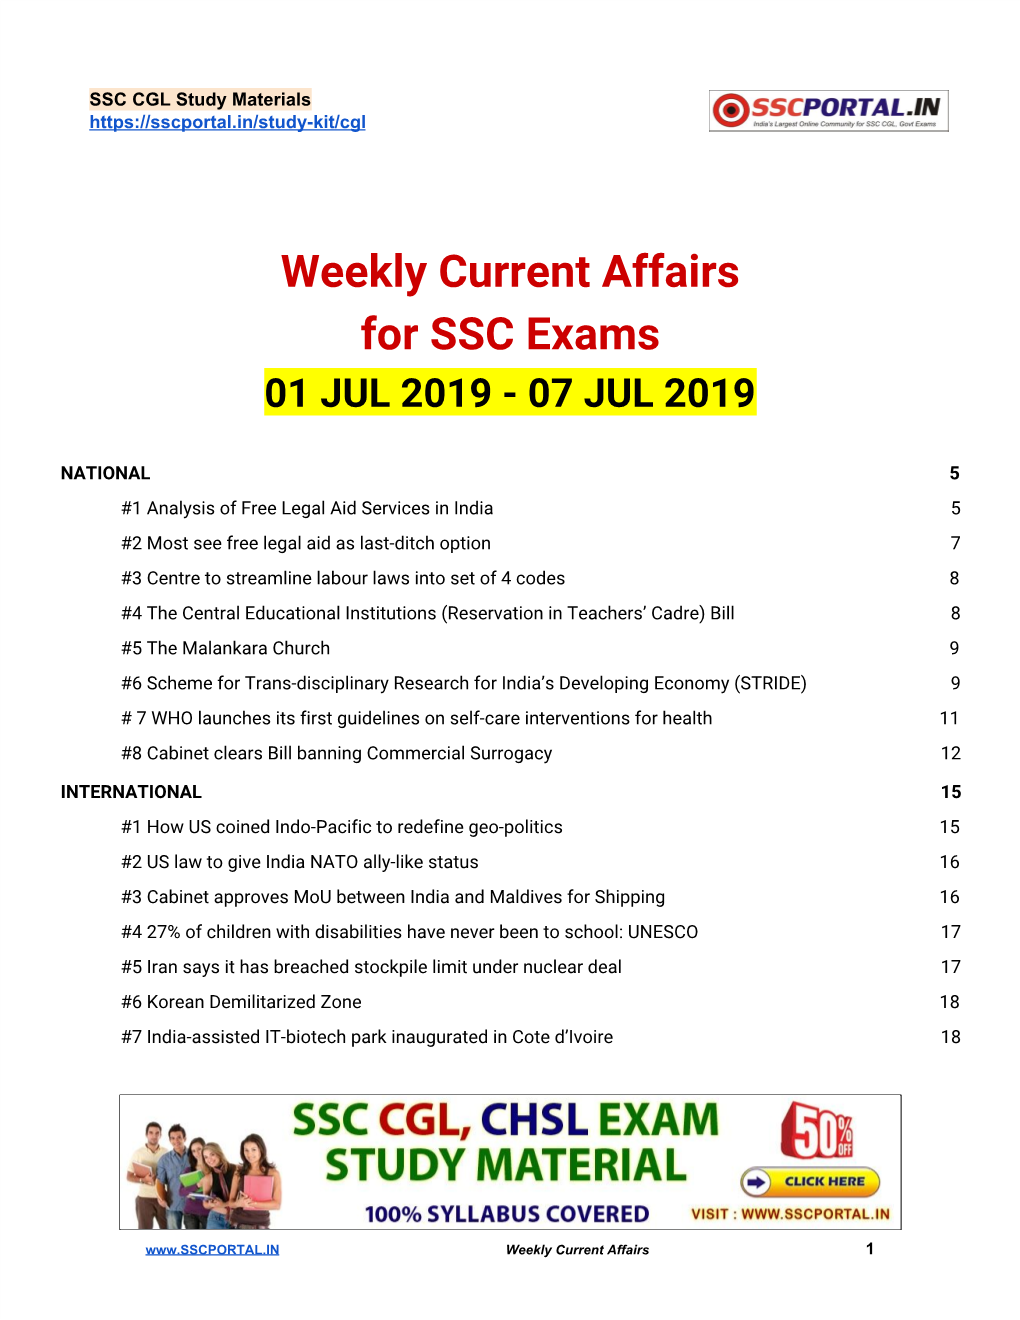 Weekly Current Affairs for SSC Exams 01 JUL 2019 - 07 JUL 2019